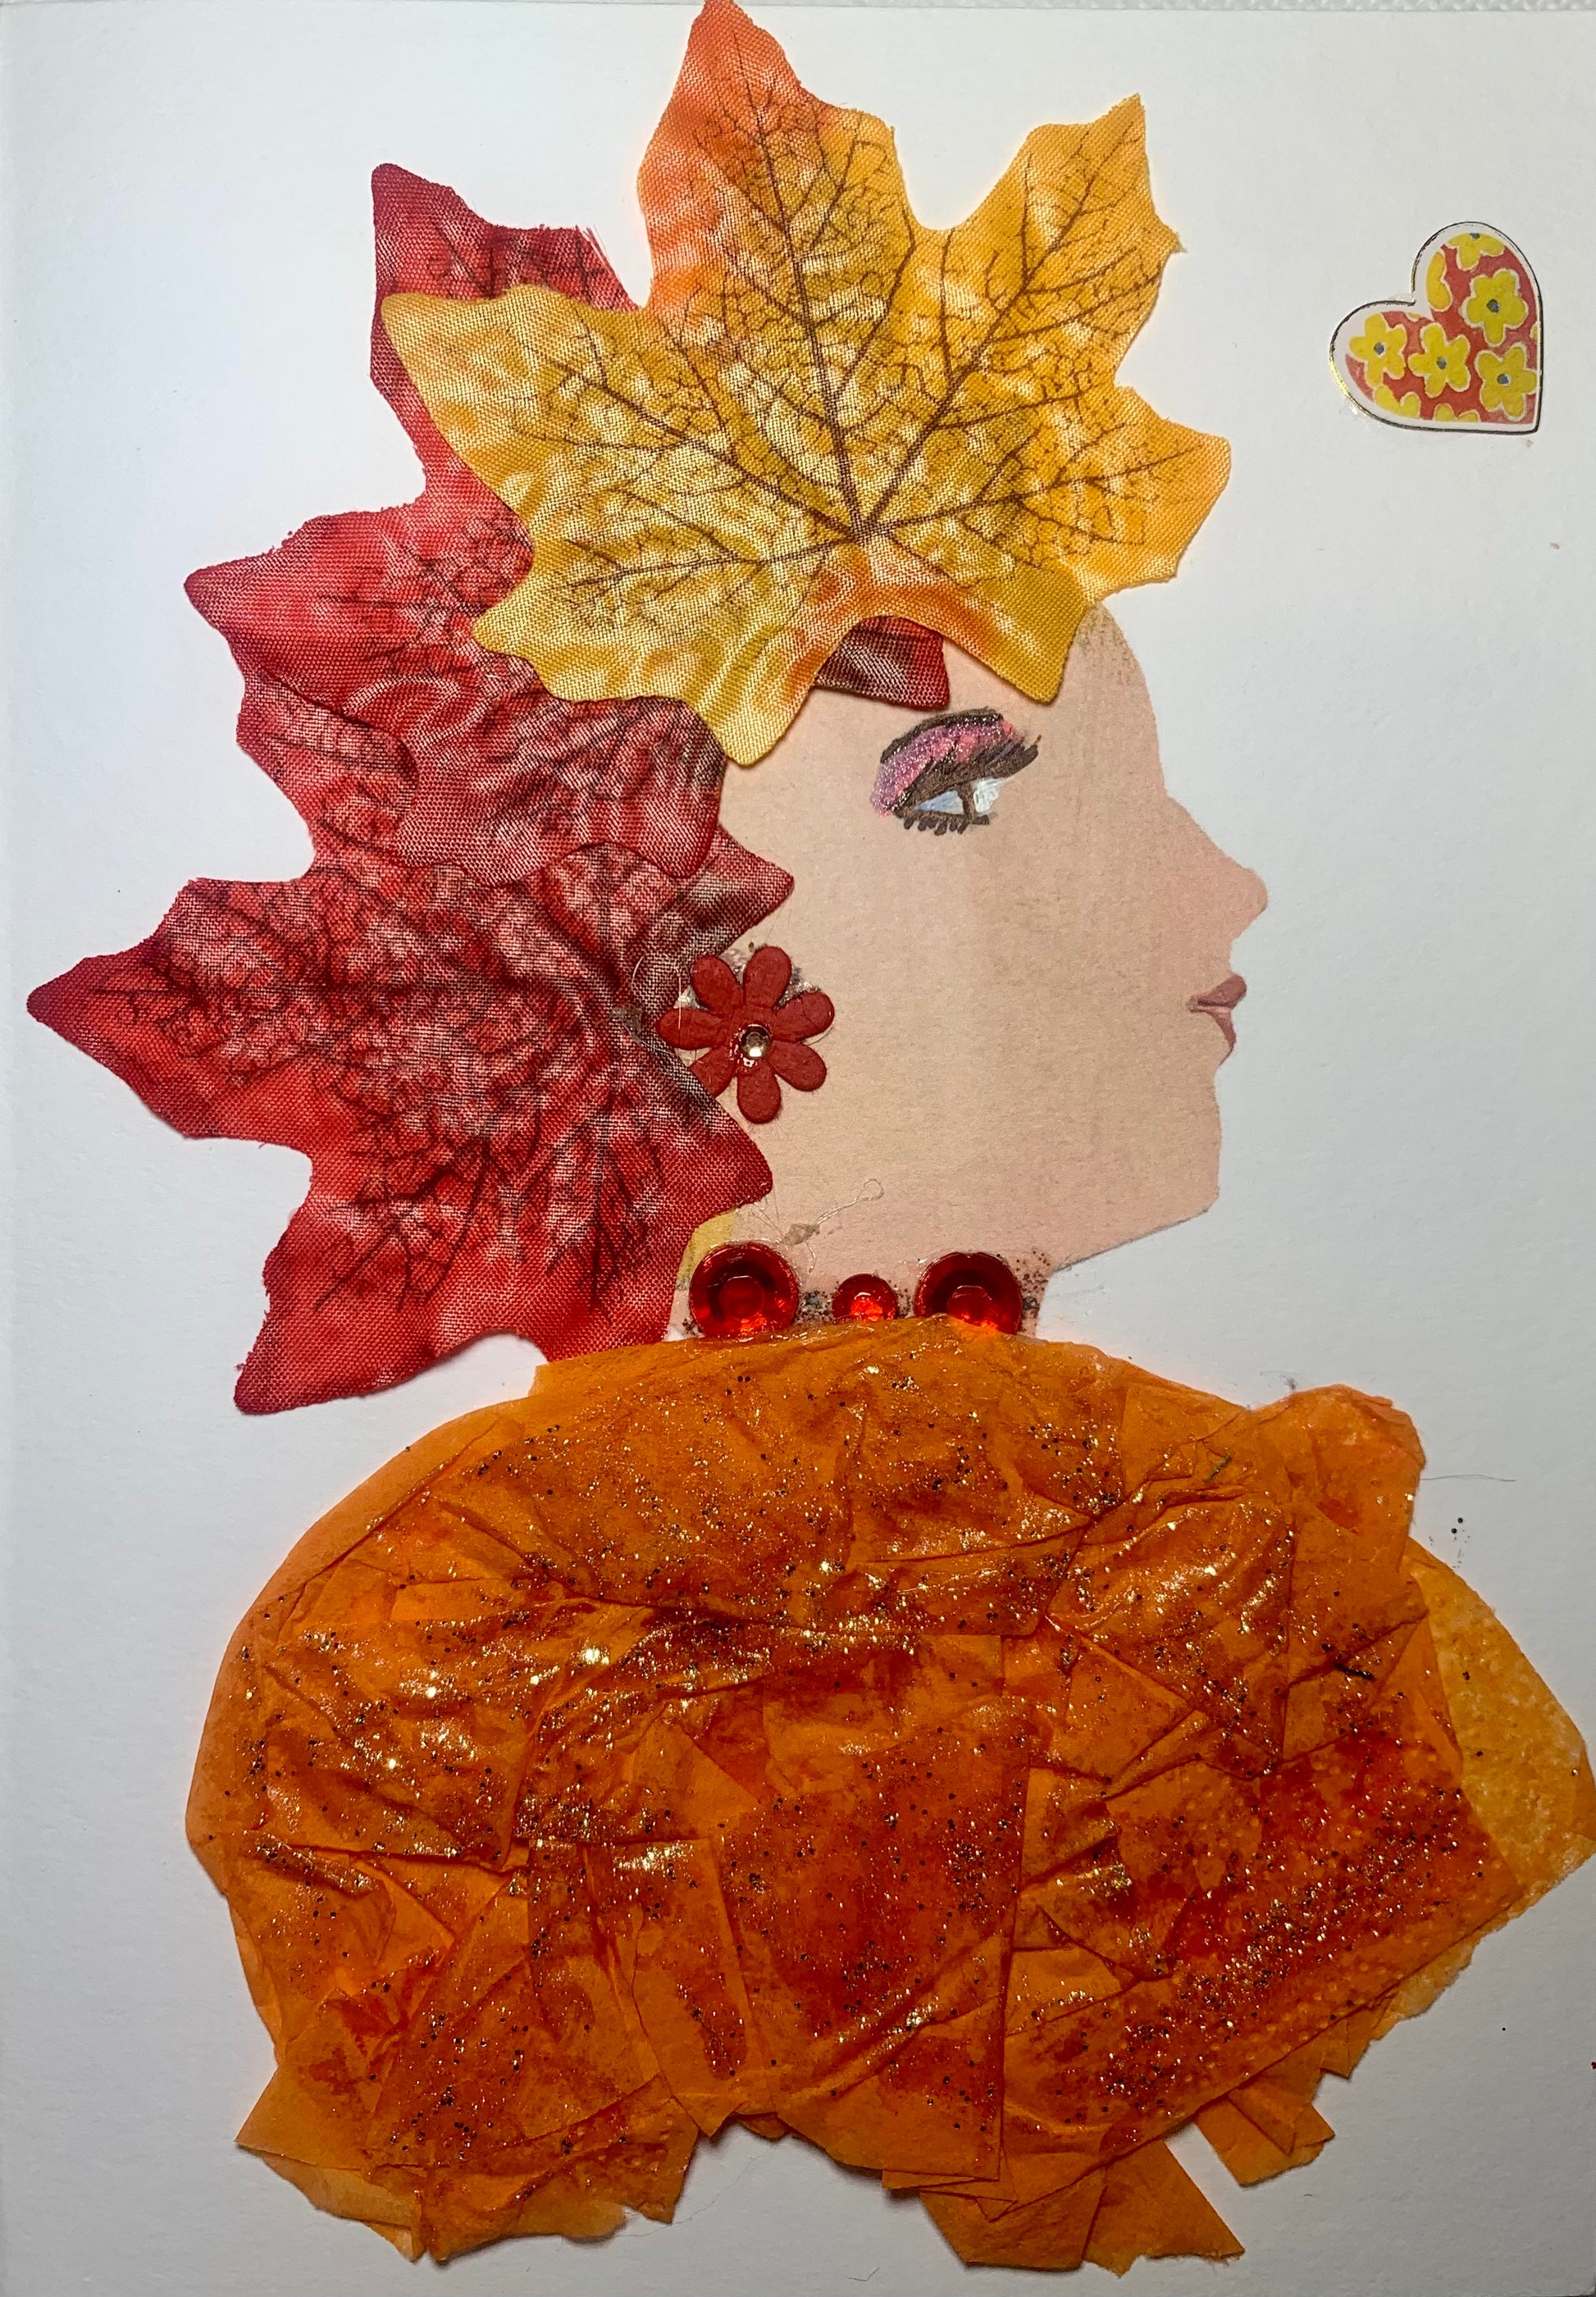 This card is of a woman called Betty. She wears a dress made of an orange paper material with gold sparkles on top. She wears a red necklace made of gemstones. On top of her head there are three oak leaves which have turned red, orange, and yellow. She wears a red flower earring. In the background, there is a small heart which has orange and yellow flowers on it. 